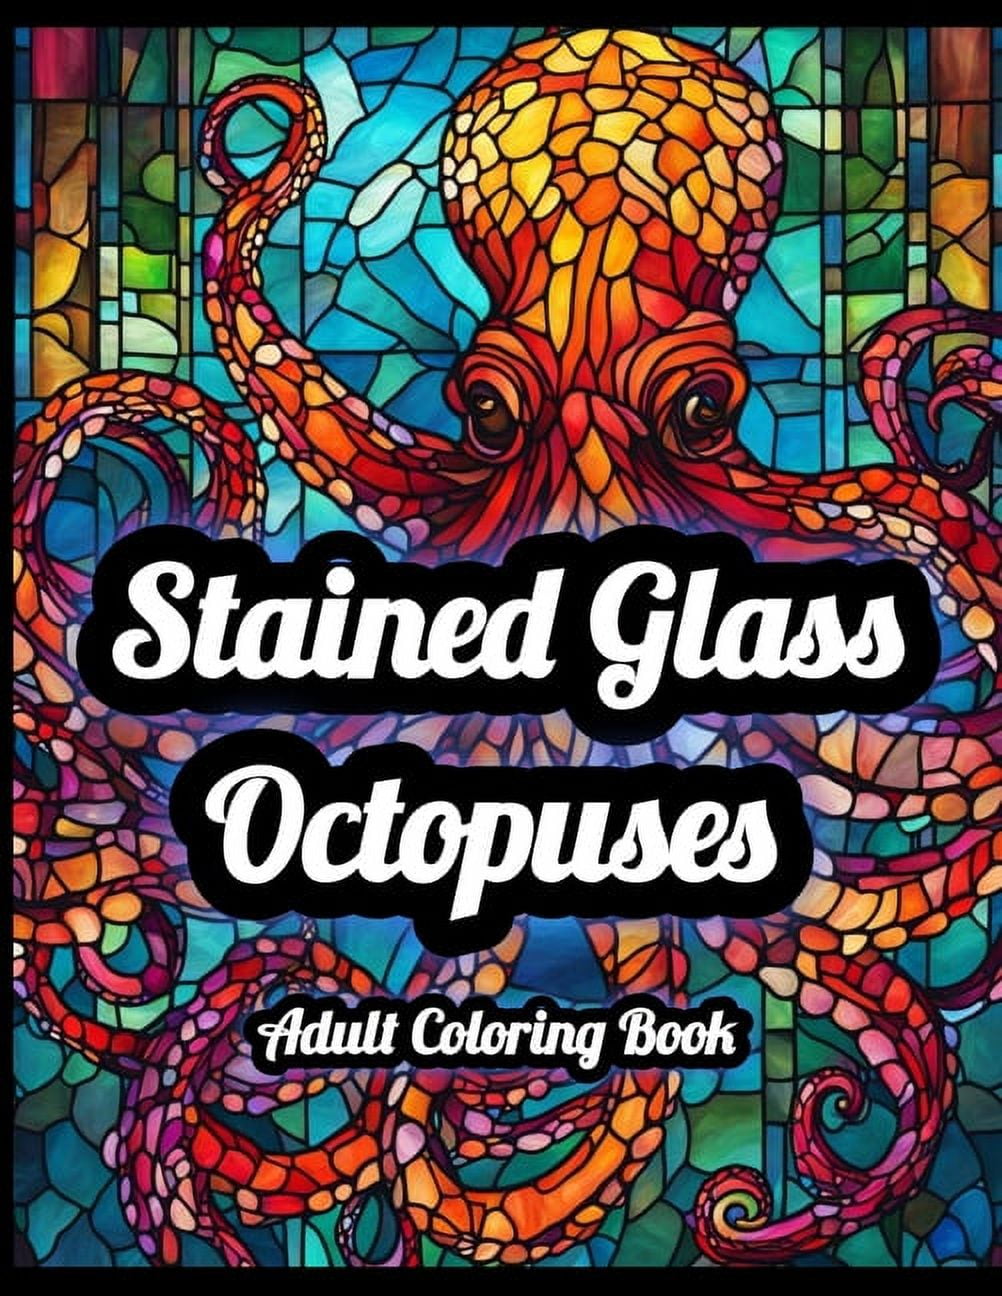 Stained glass octopuses adult coloring book paperback by crawl carlisle